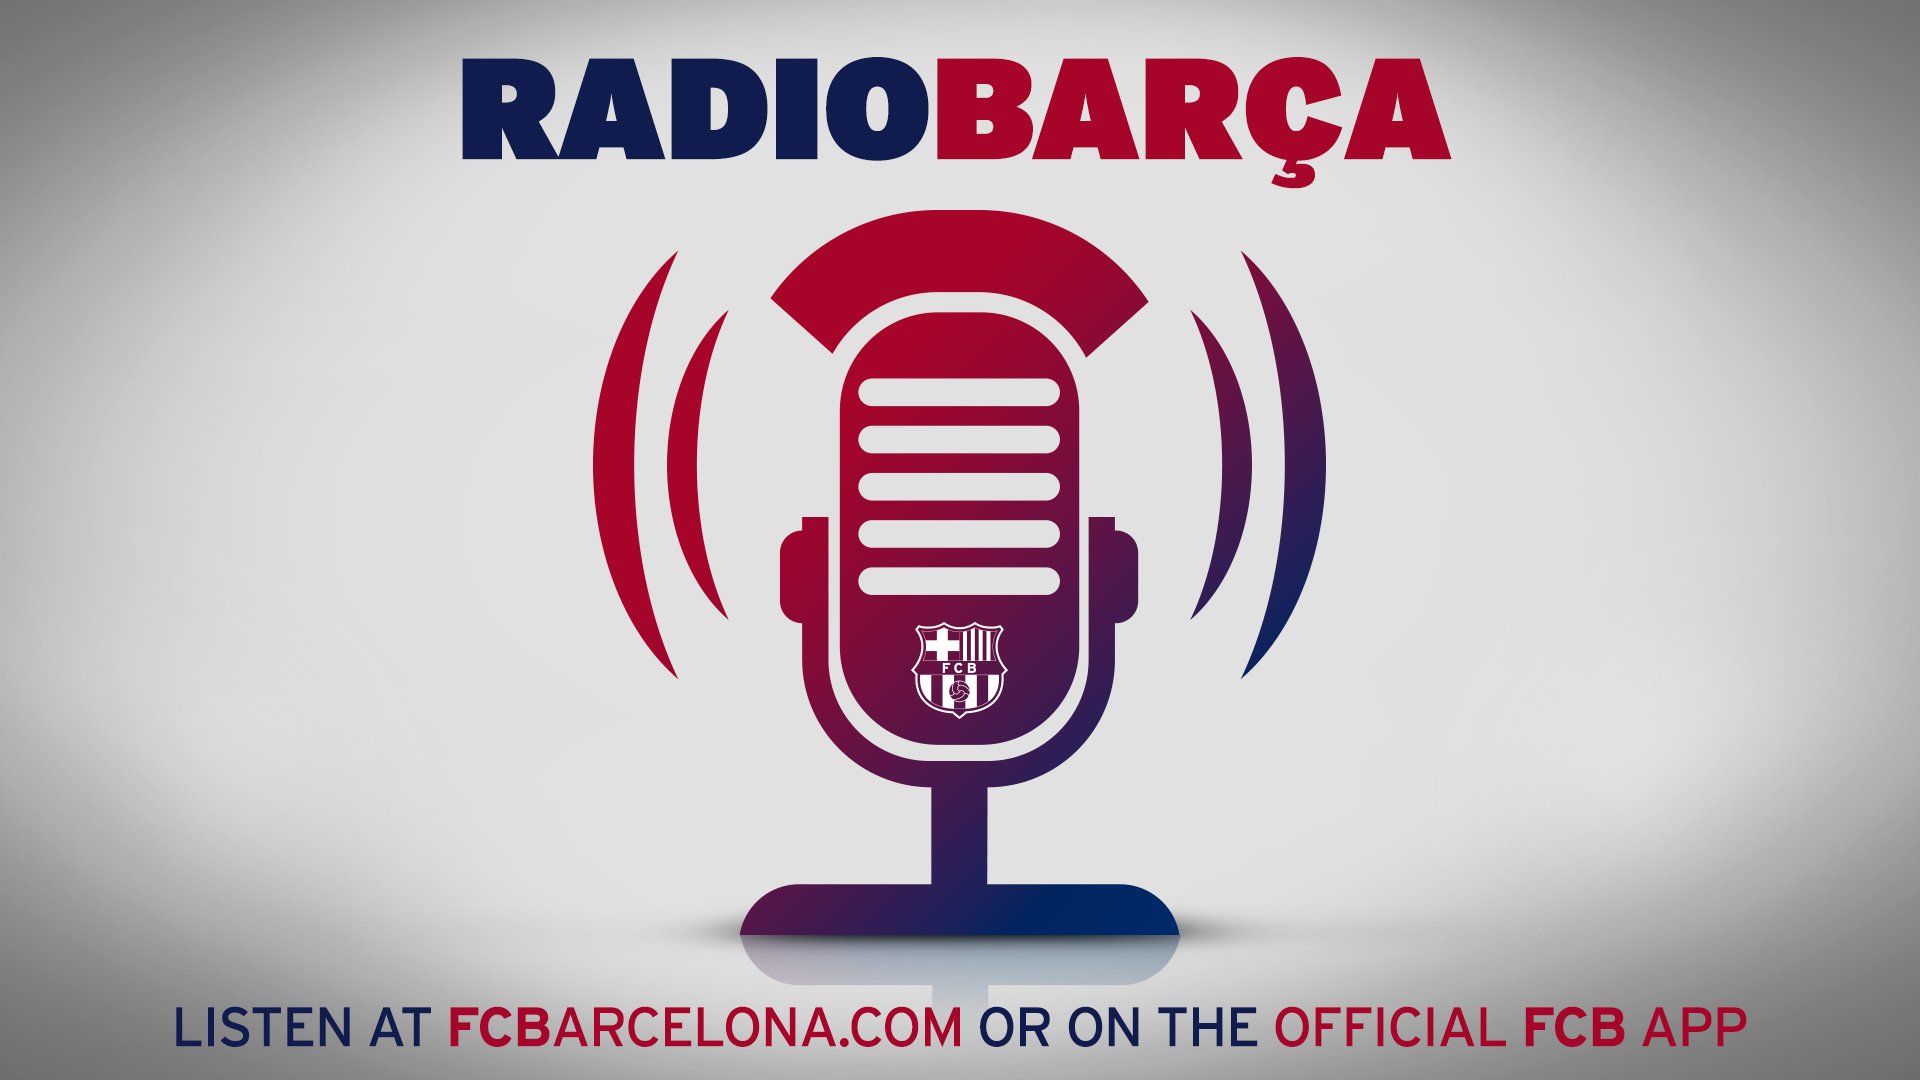 FC Barcelona on Twitter: "Remember you can listen to live commentary in  English of #RealFCB on Radio Barça at https://t.co/A1WiJBXvhL #FCBlive  https://t.co/71ZAzpgmg1" / Twitter